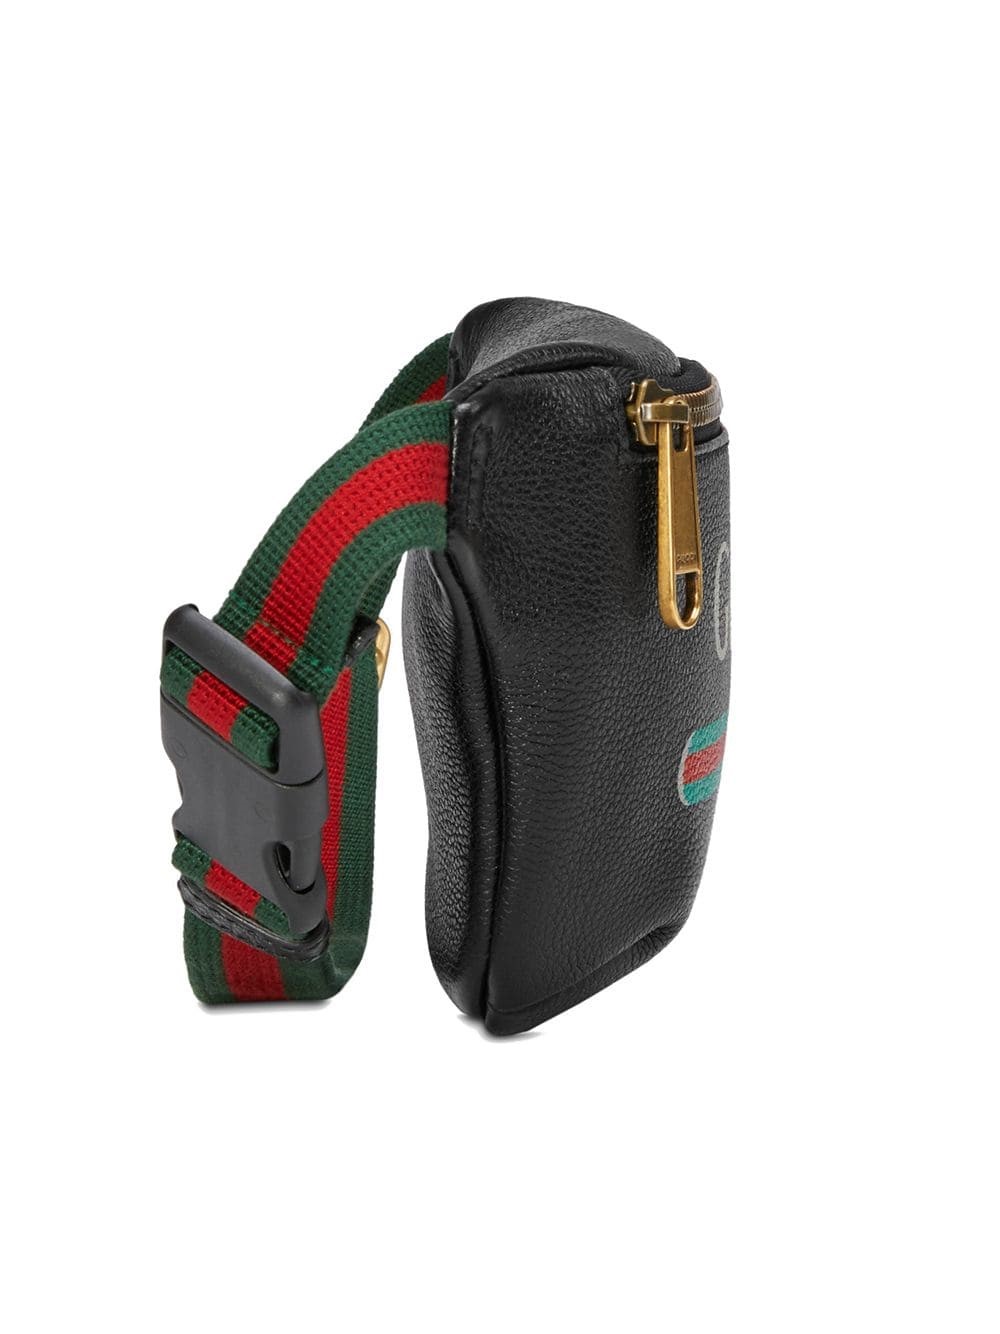 gucci LOGO BELT BAG available on mediakits.theygsgroup.com - 25060